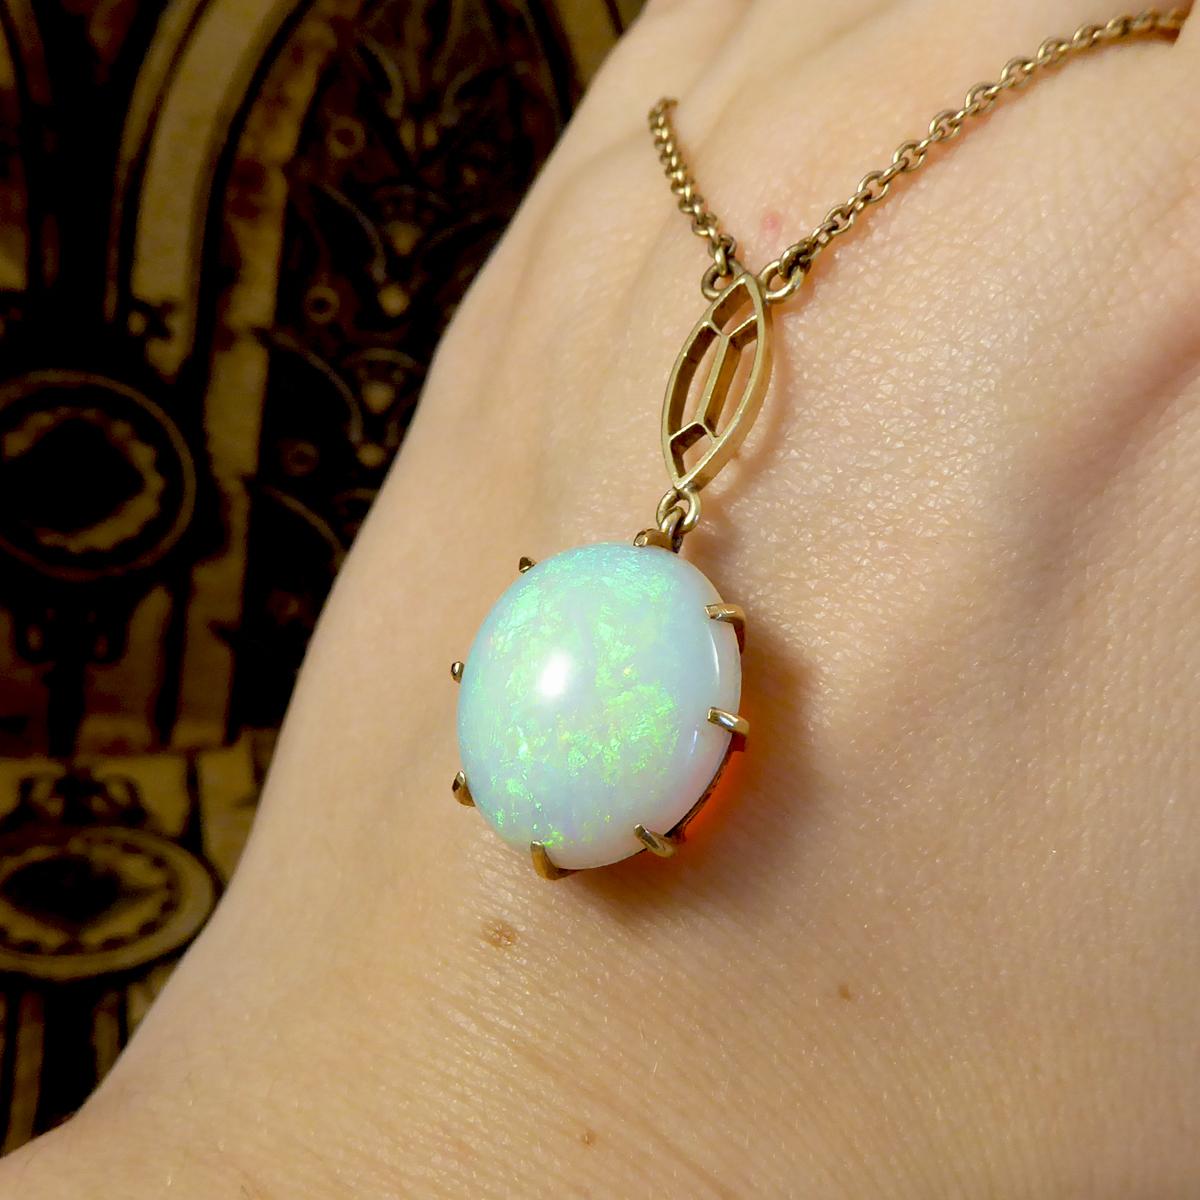 Oval Cut Vintage Single Opal Pendant Necklace on Bail Linked 9 Carat Yellow Gold Chain